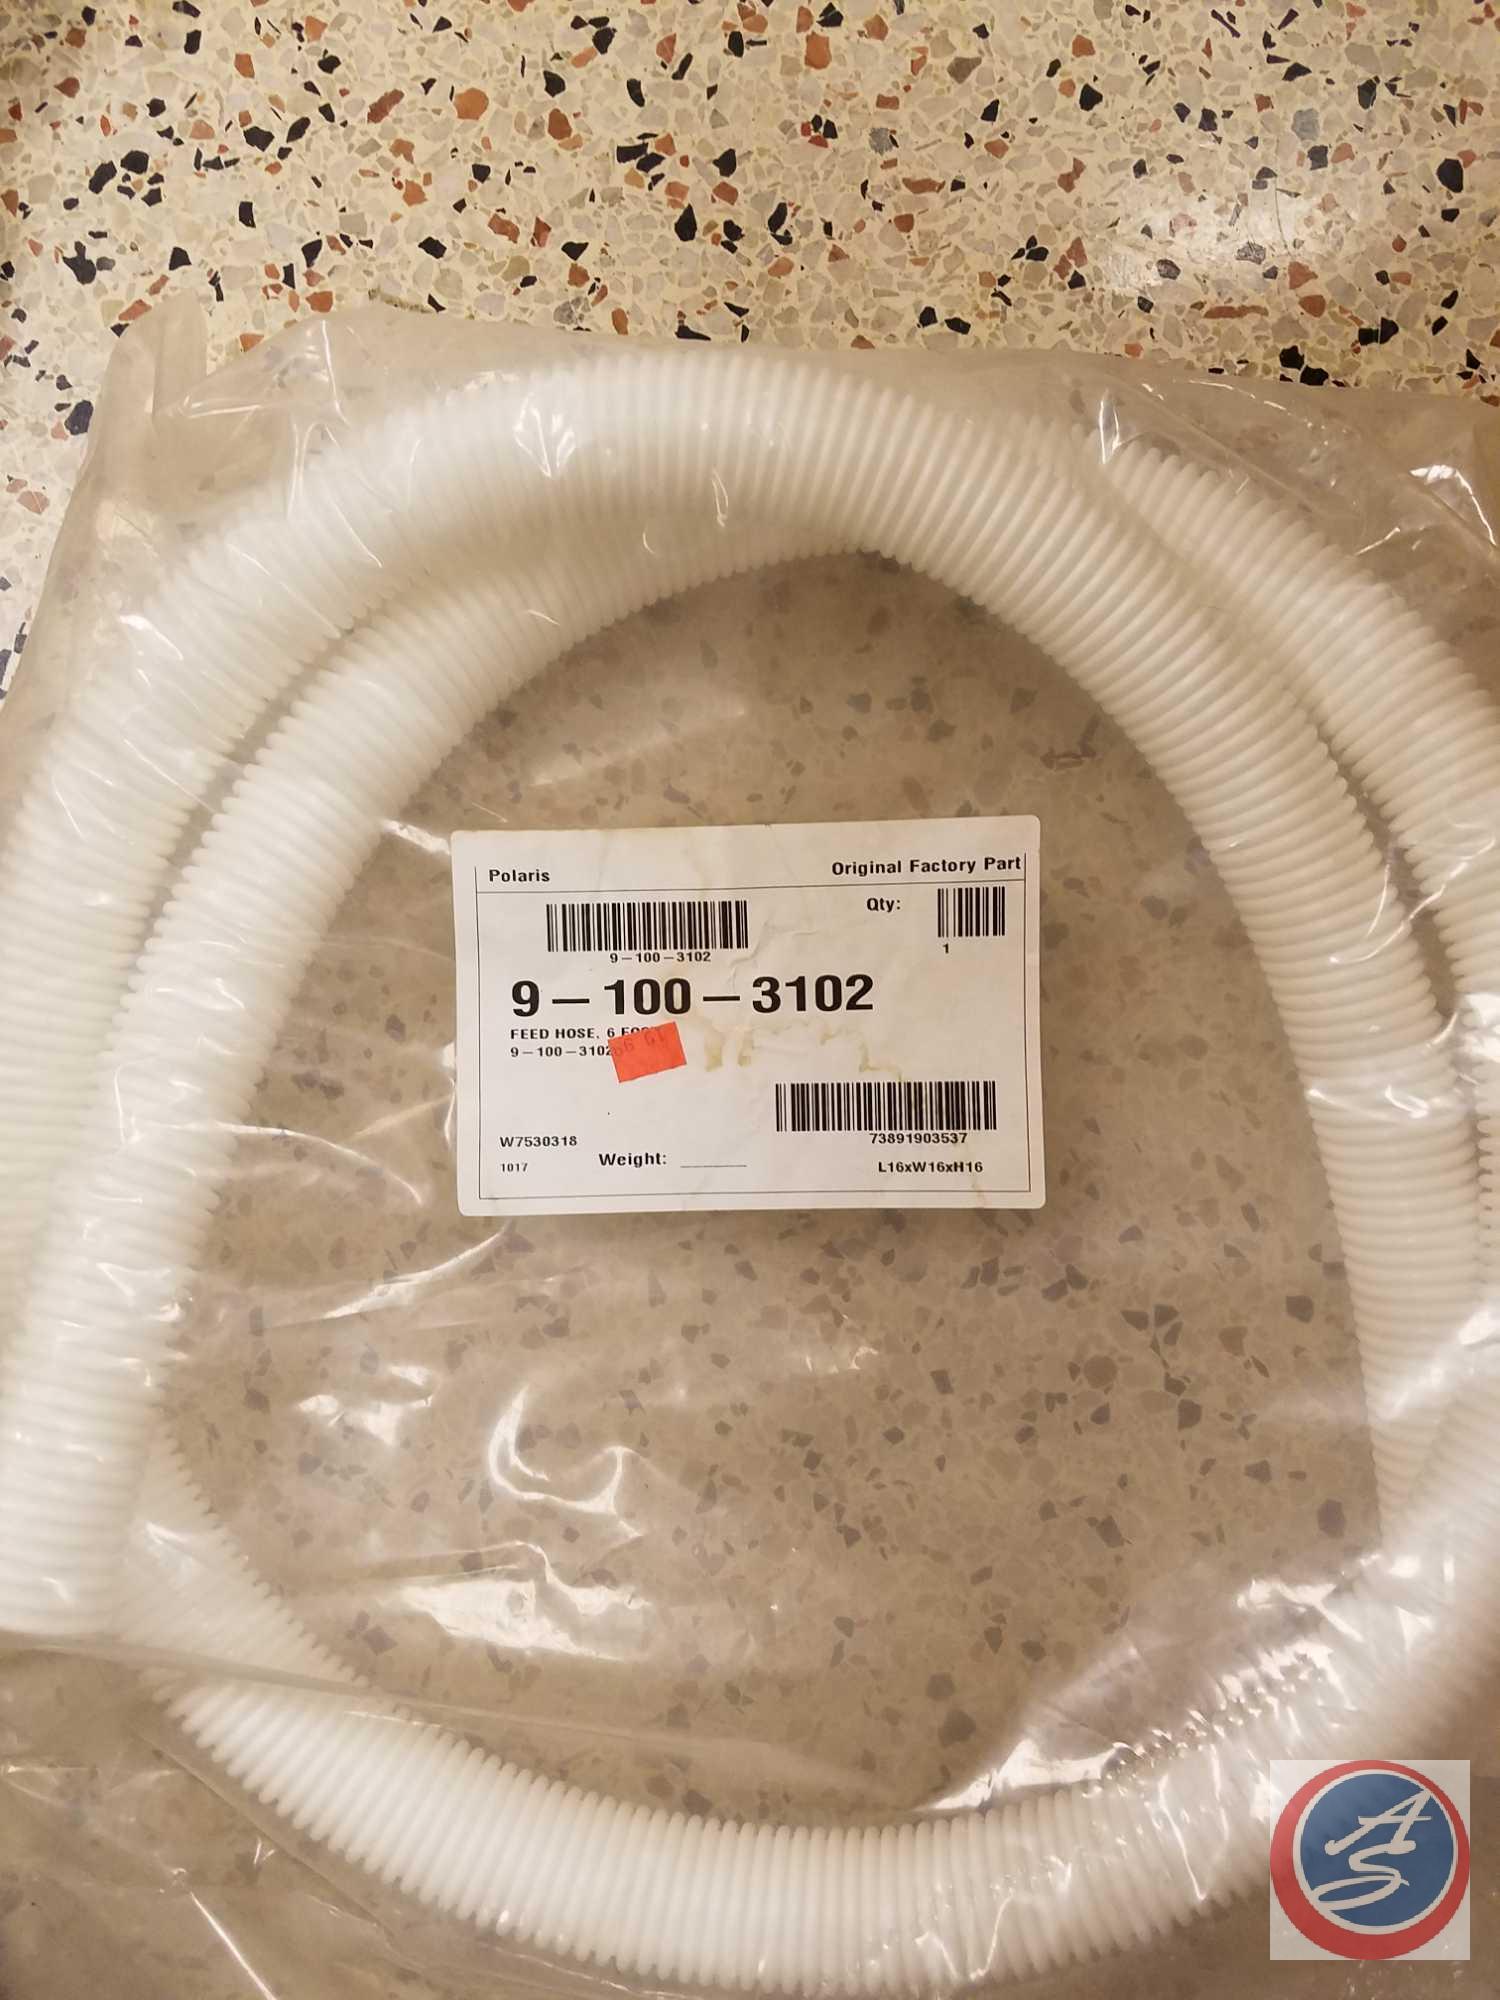 Polaris Booster Pump Hose Without Fitting, P22 Heavy Duty Pressure Hose 3ft. With Fittings, 6ft.